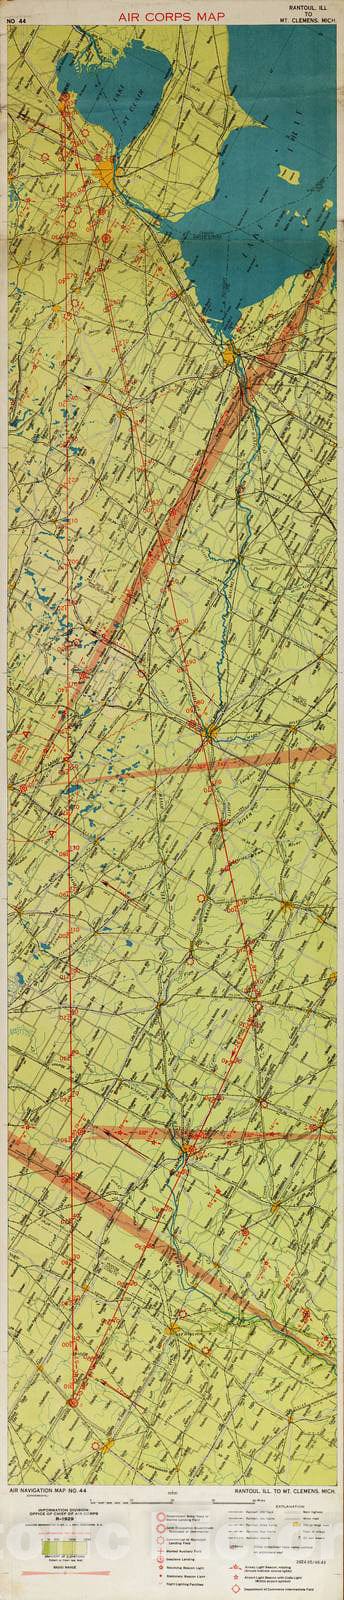 Historic 1924 Map - Aeronautical Strip maps of The United States. - No. 44, 1929 - rev. 1932 - Air Corps map